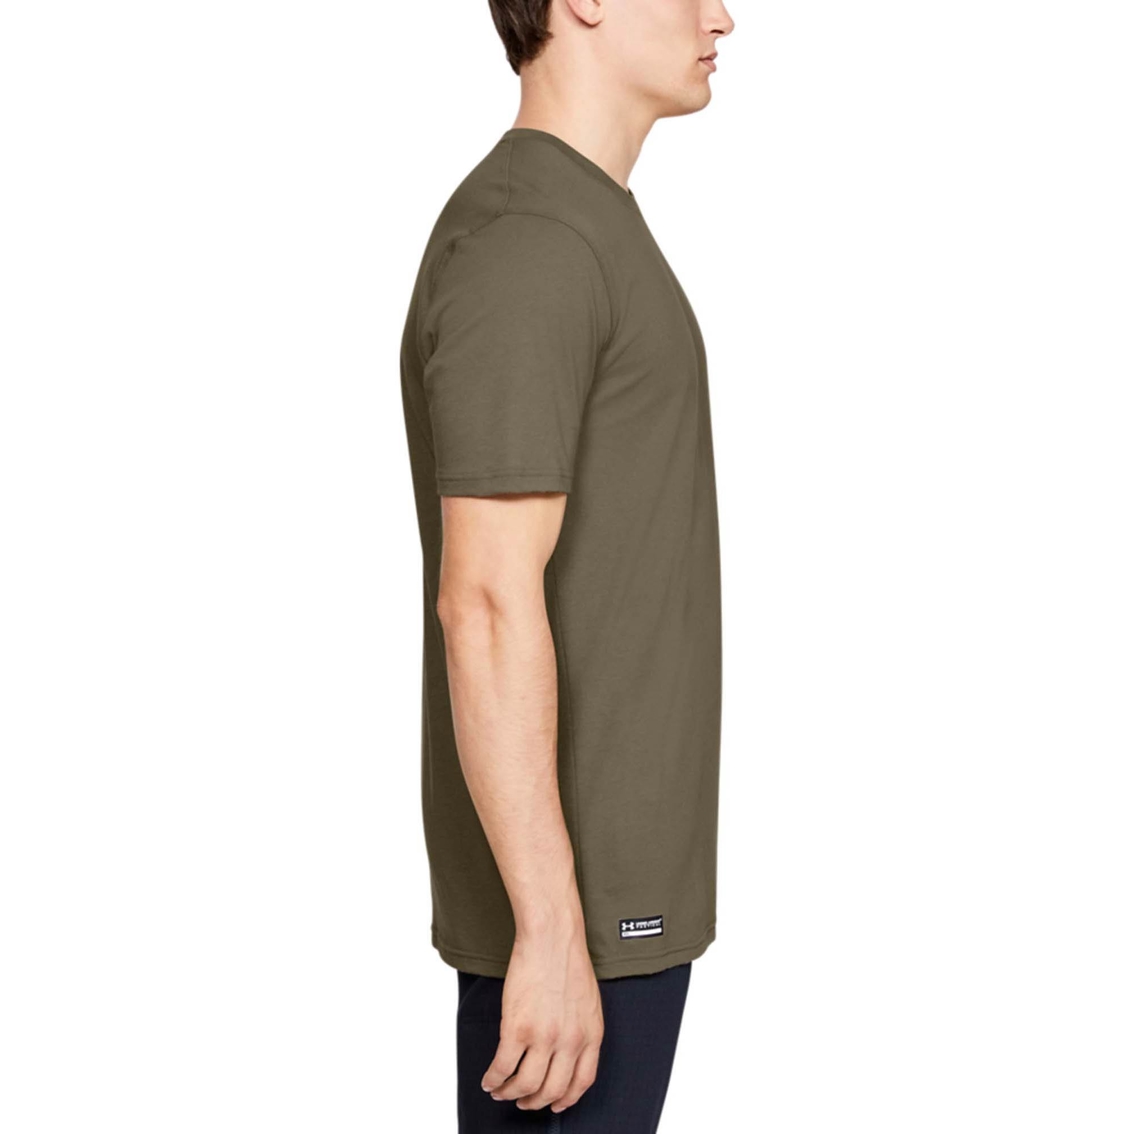 Under Armour M Tac Cotton Tee - Image 3 of 6